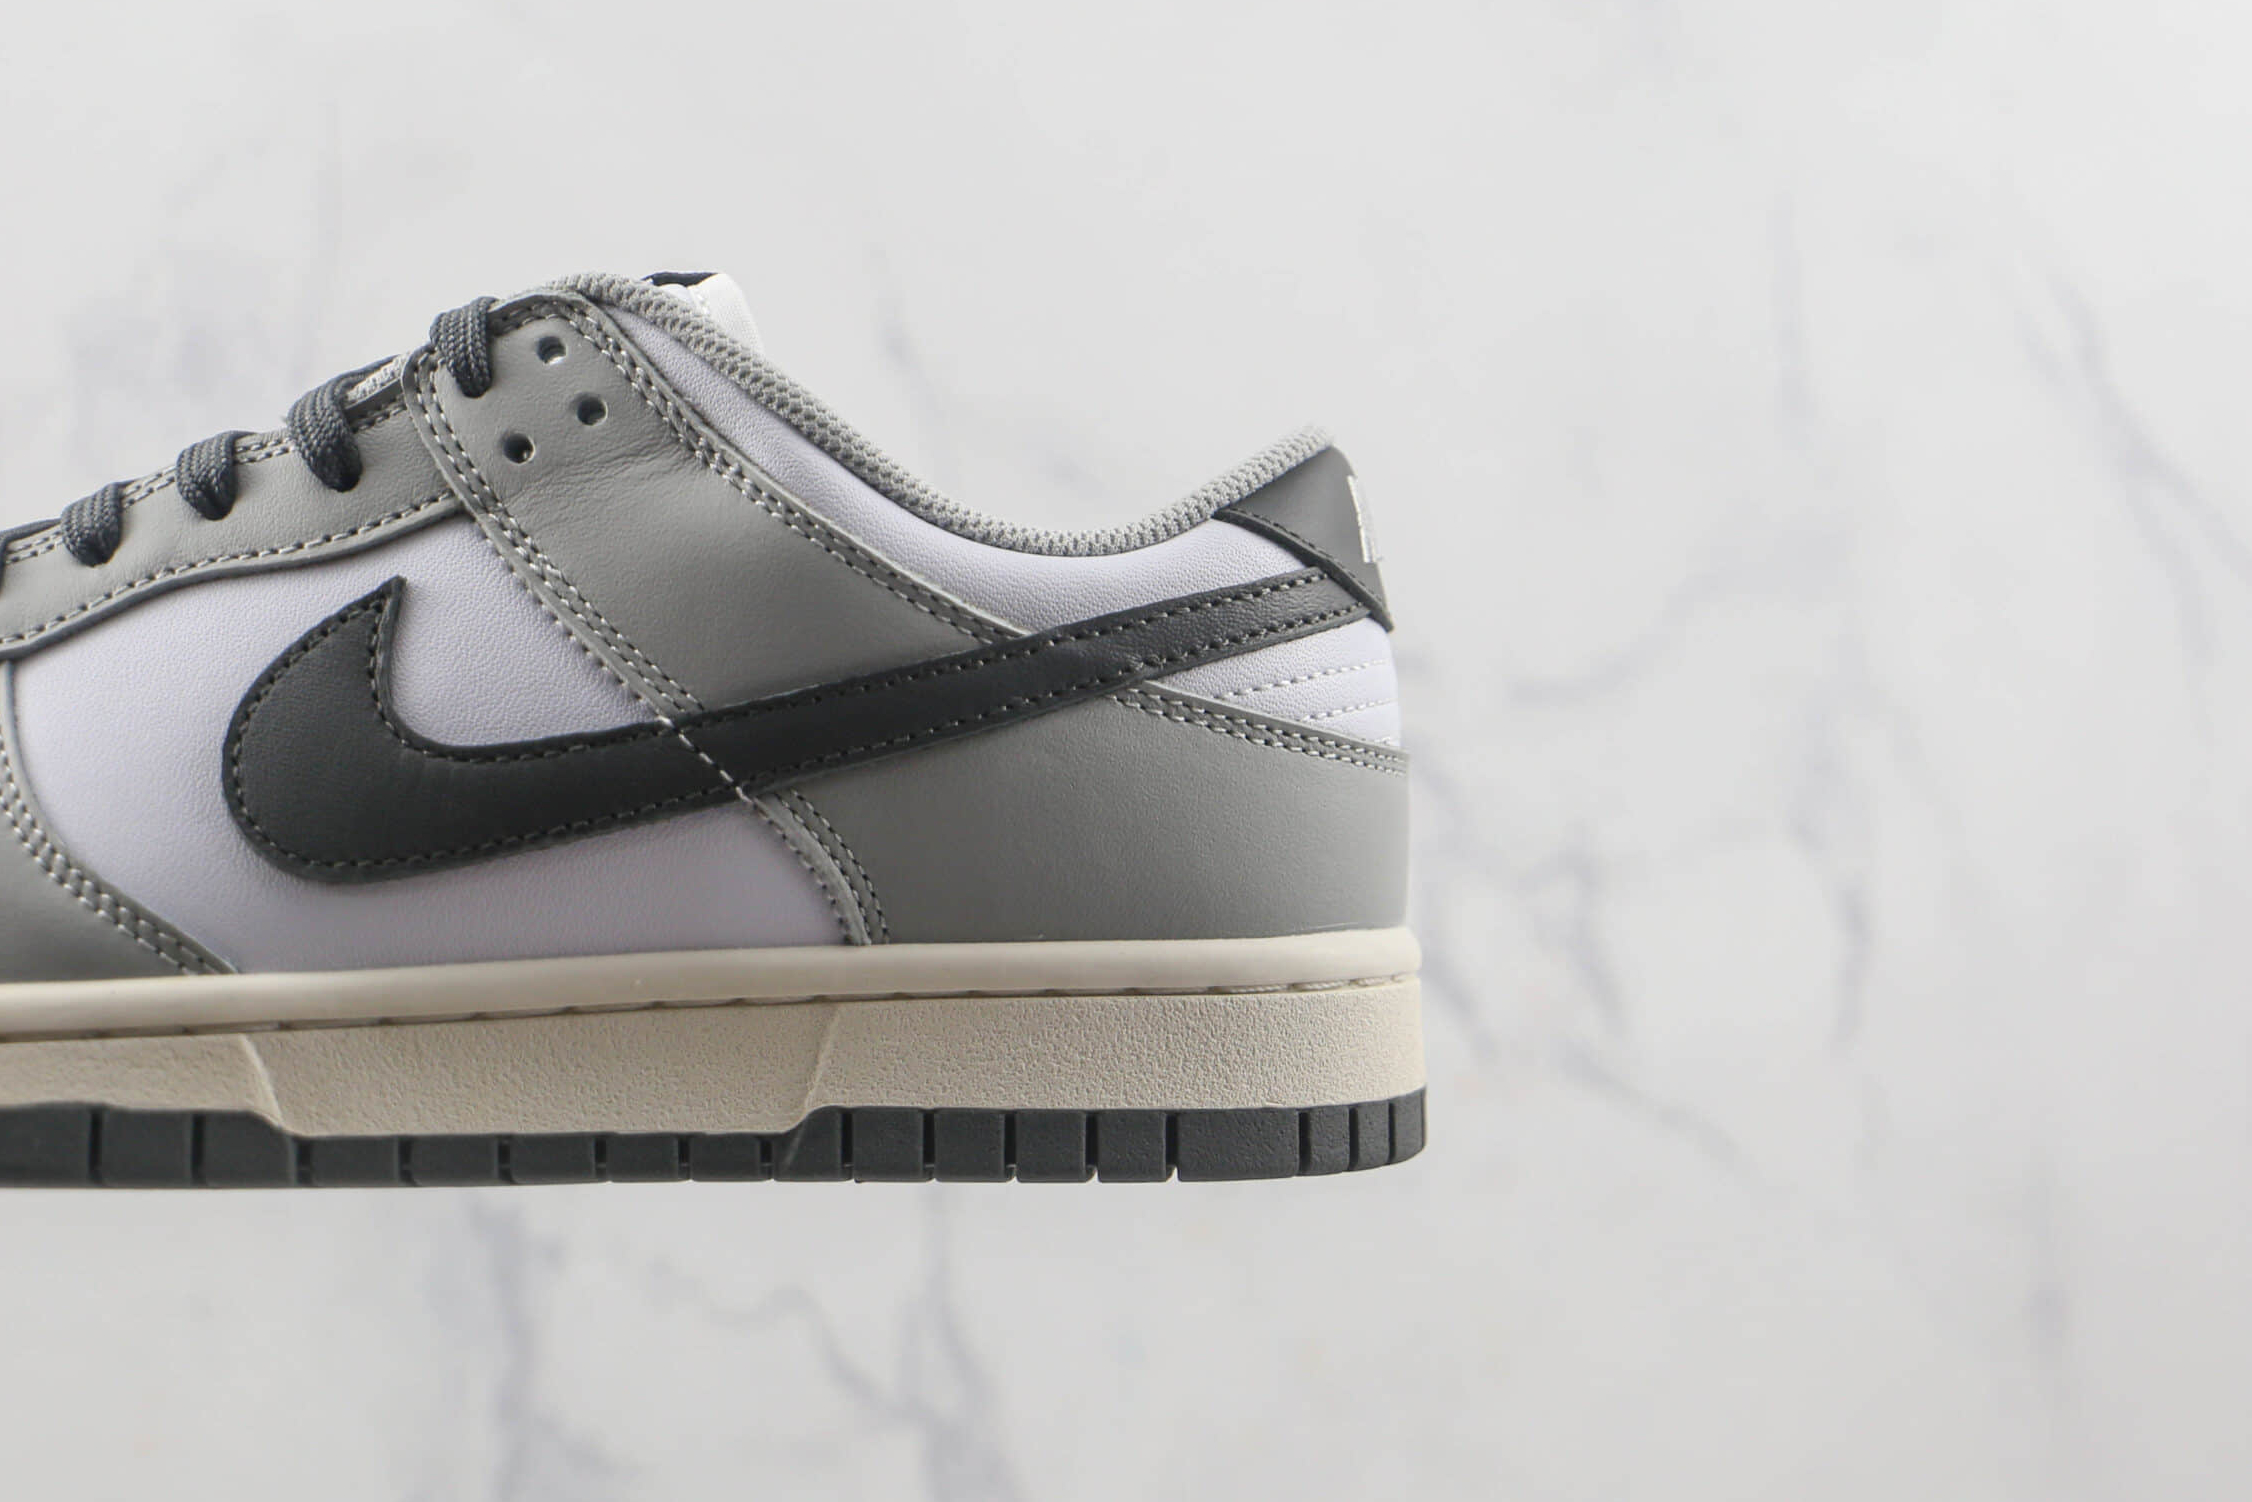 Nike Dunk Low 'Light Smoke Grey' DD1503-117 - Stylish and Versatile Sneakers for Men